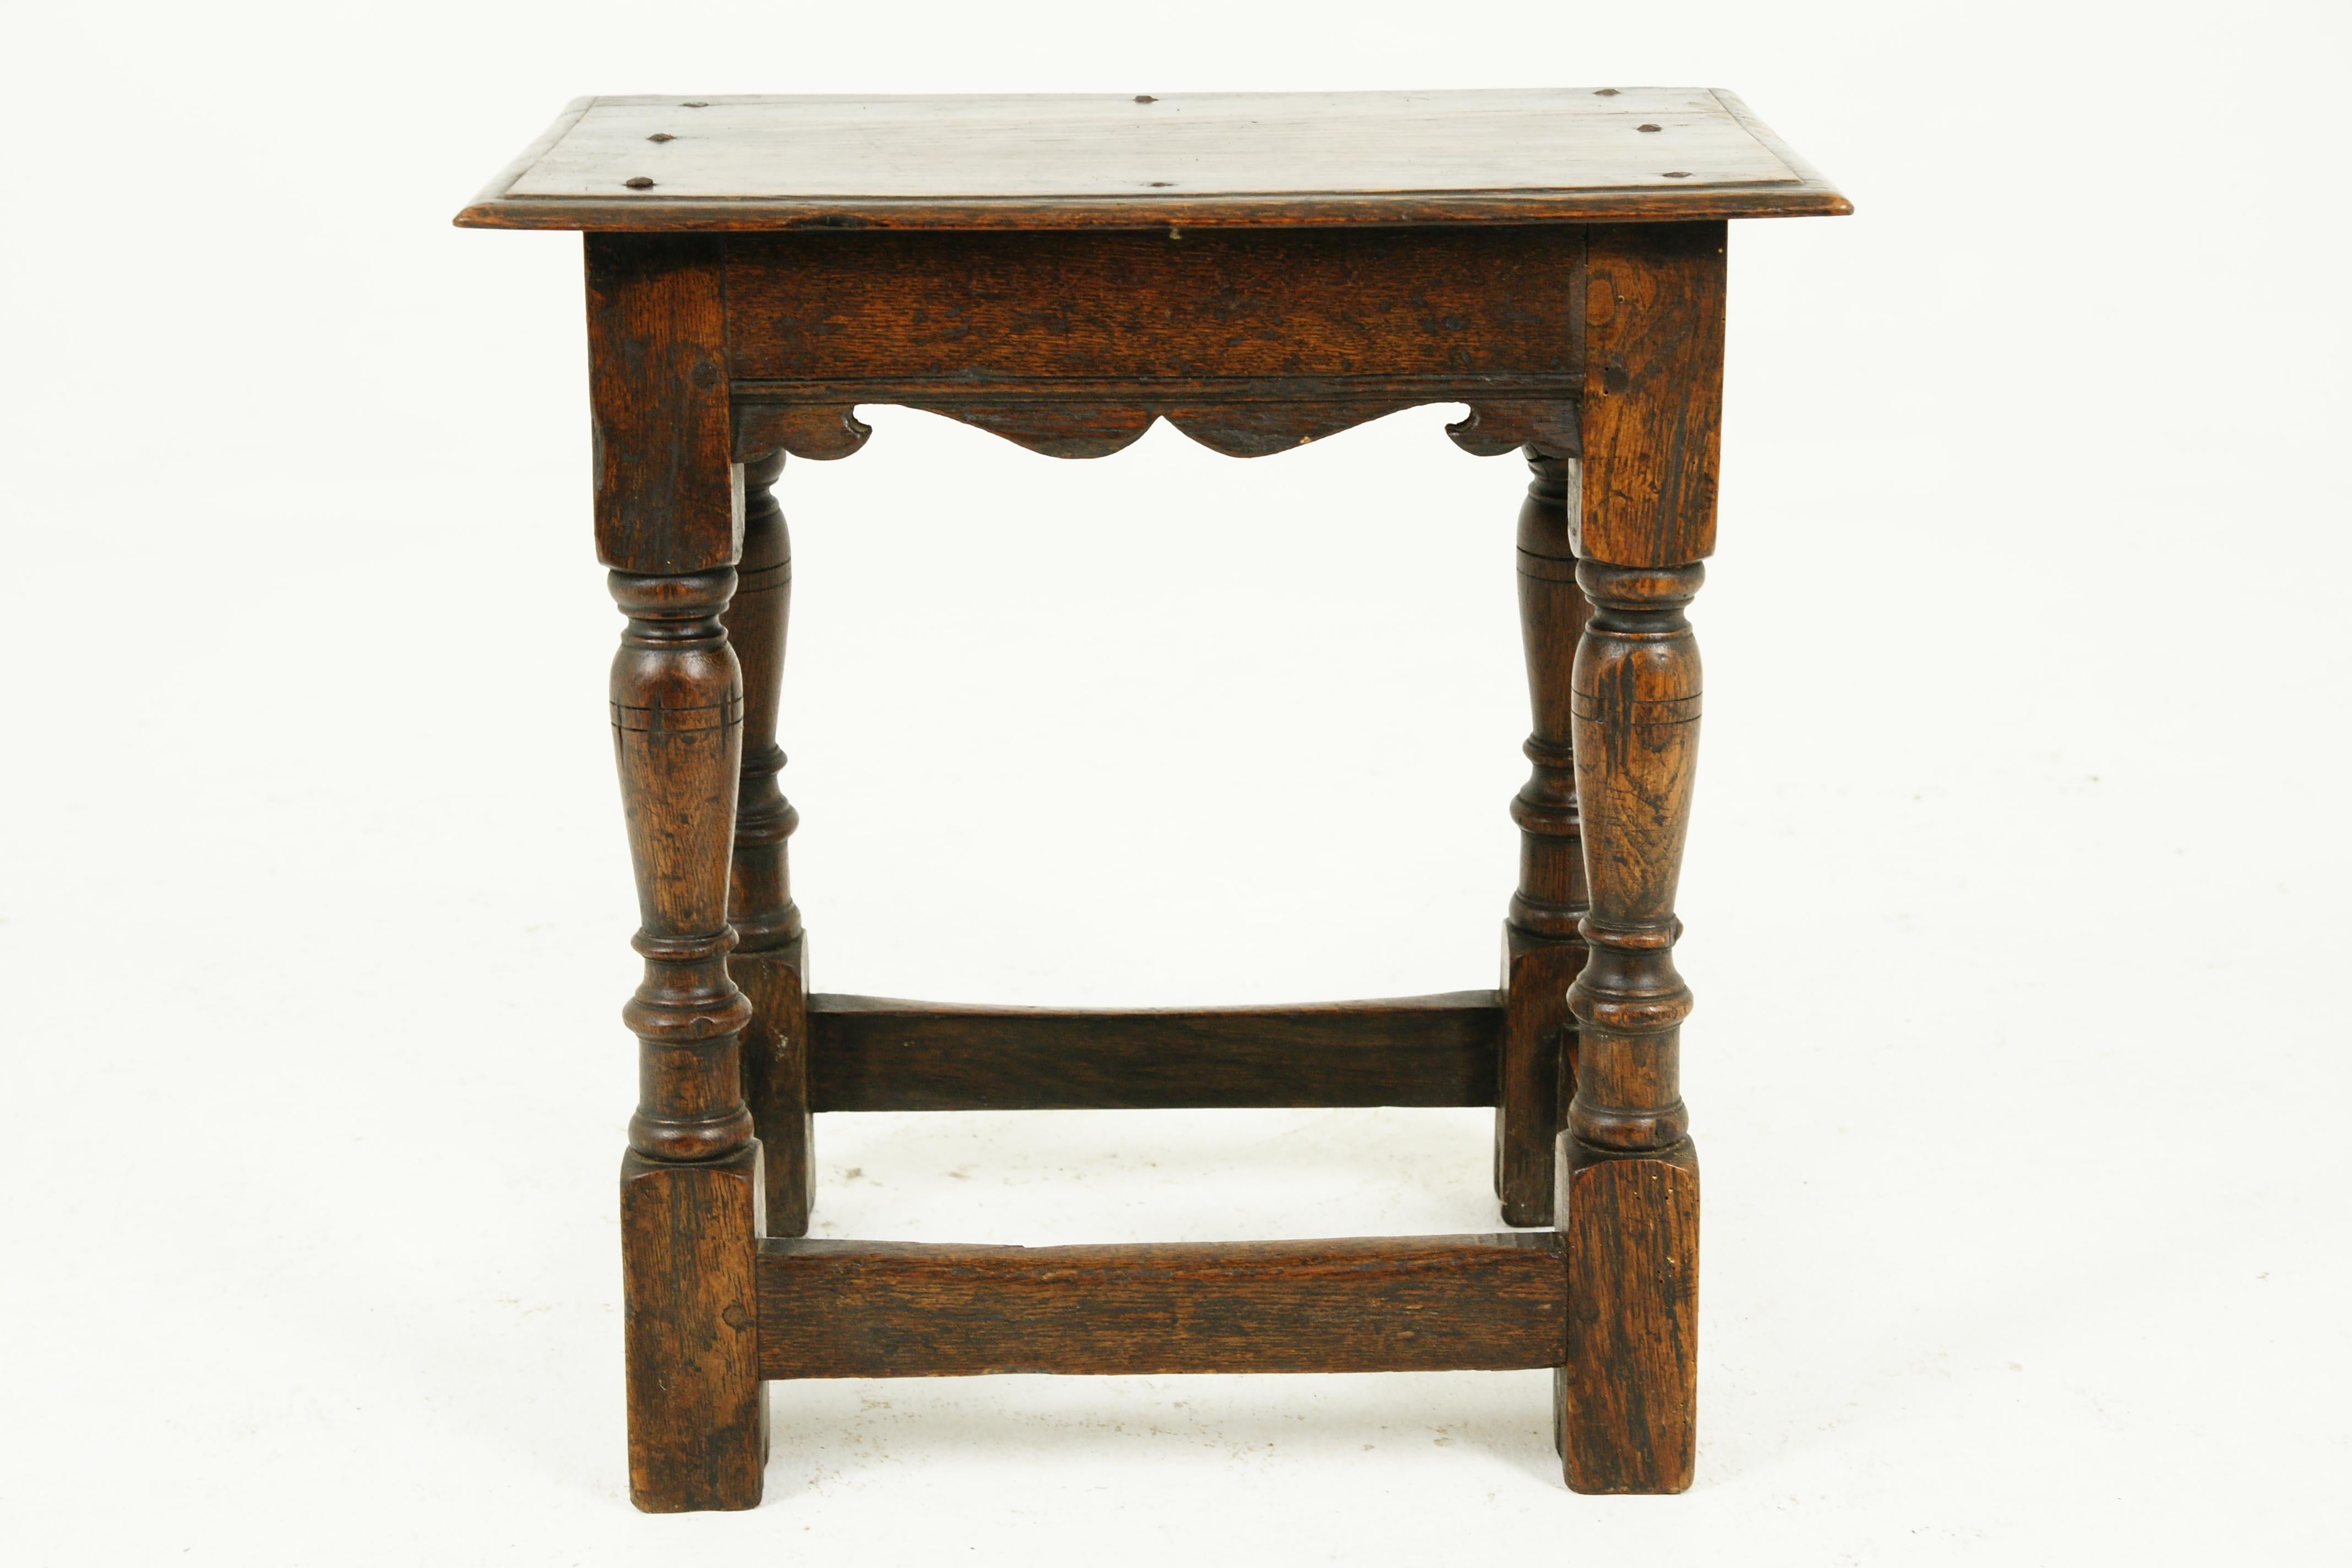 Antique oak Victorian Joint Stool Bench, Scotland 1900, B2436

Scotland 1900
Solid oak
Original finish
Rectangular pegged top with moulded legs
Serpentine skirt underneath
Rising on four turned legs all connected by pegged lower foot